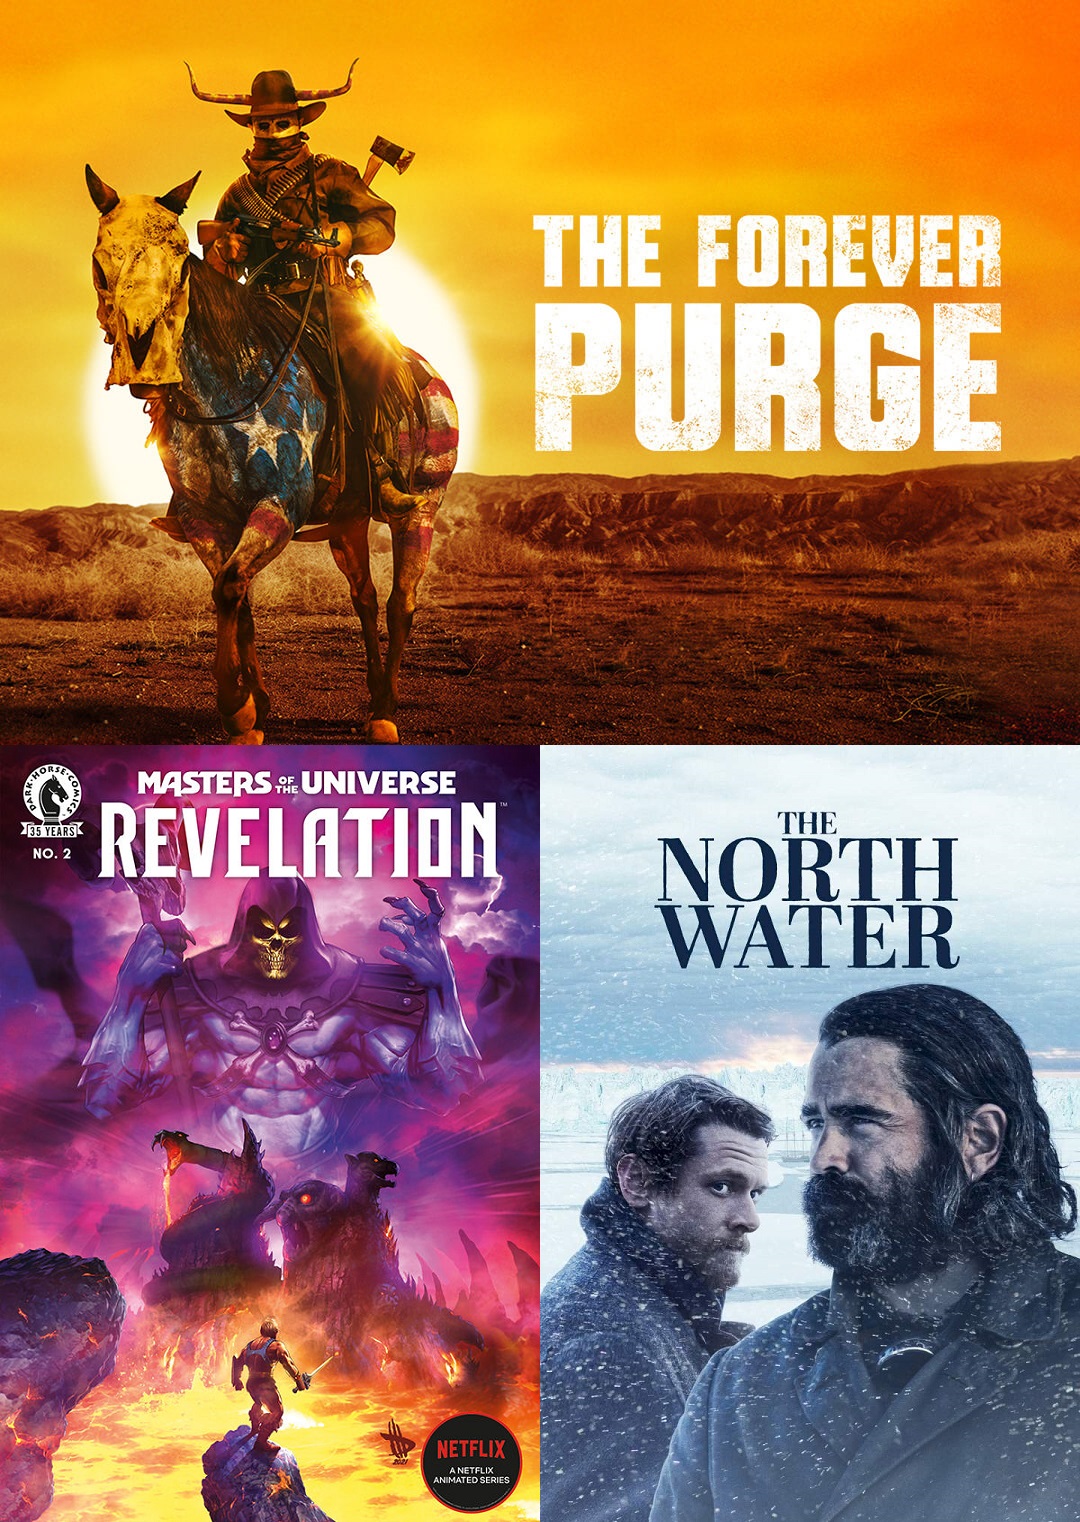 Podcast Episode 07 Poster - The Forever Purge, Masters of the Universe - Revelation, The North Water